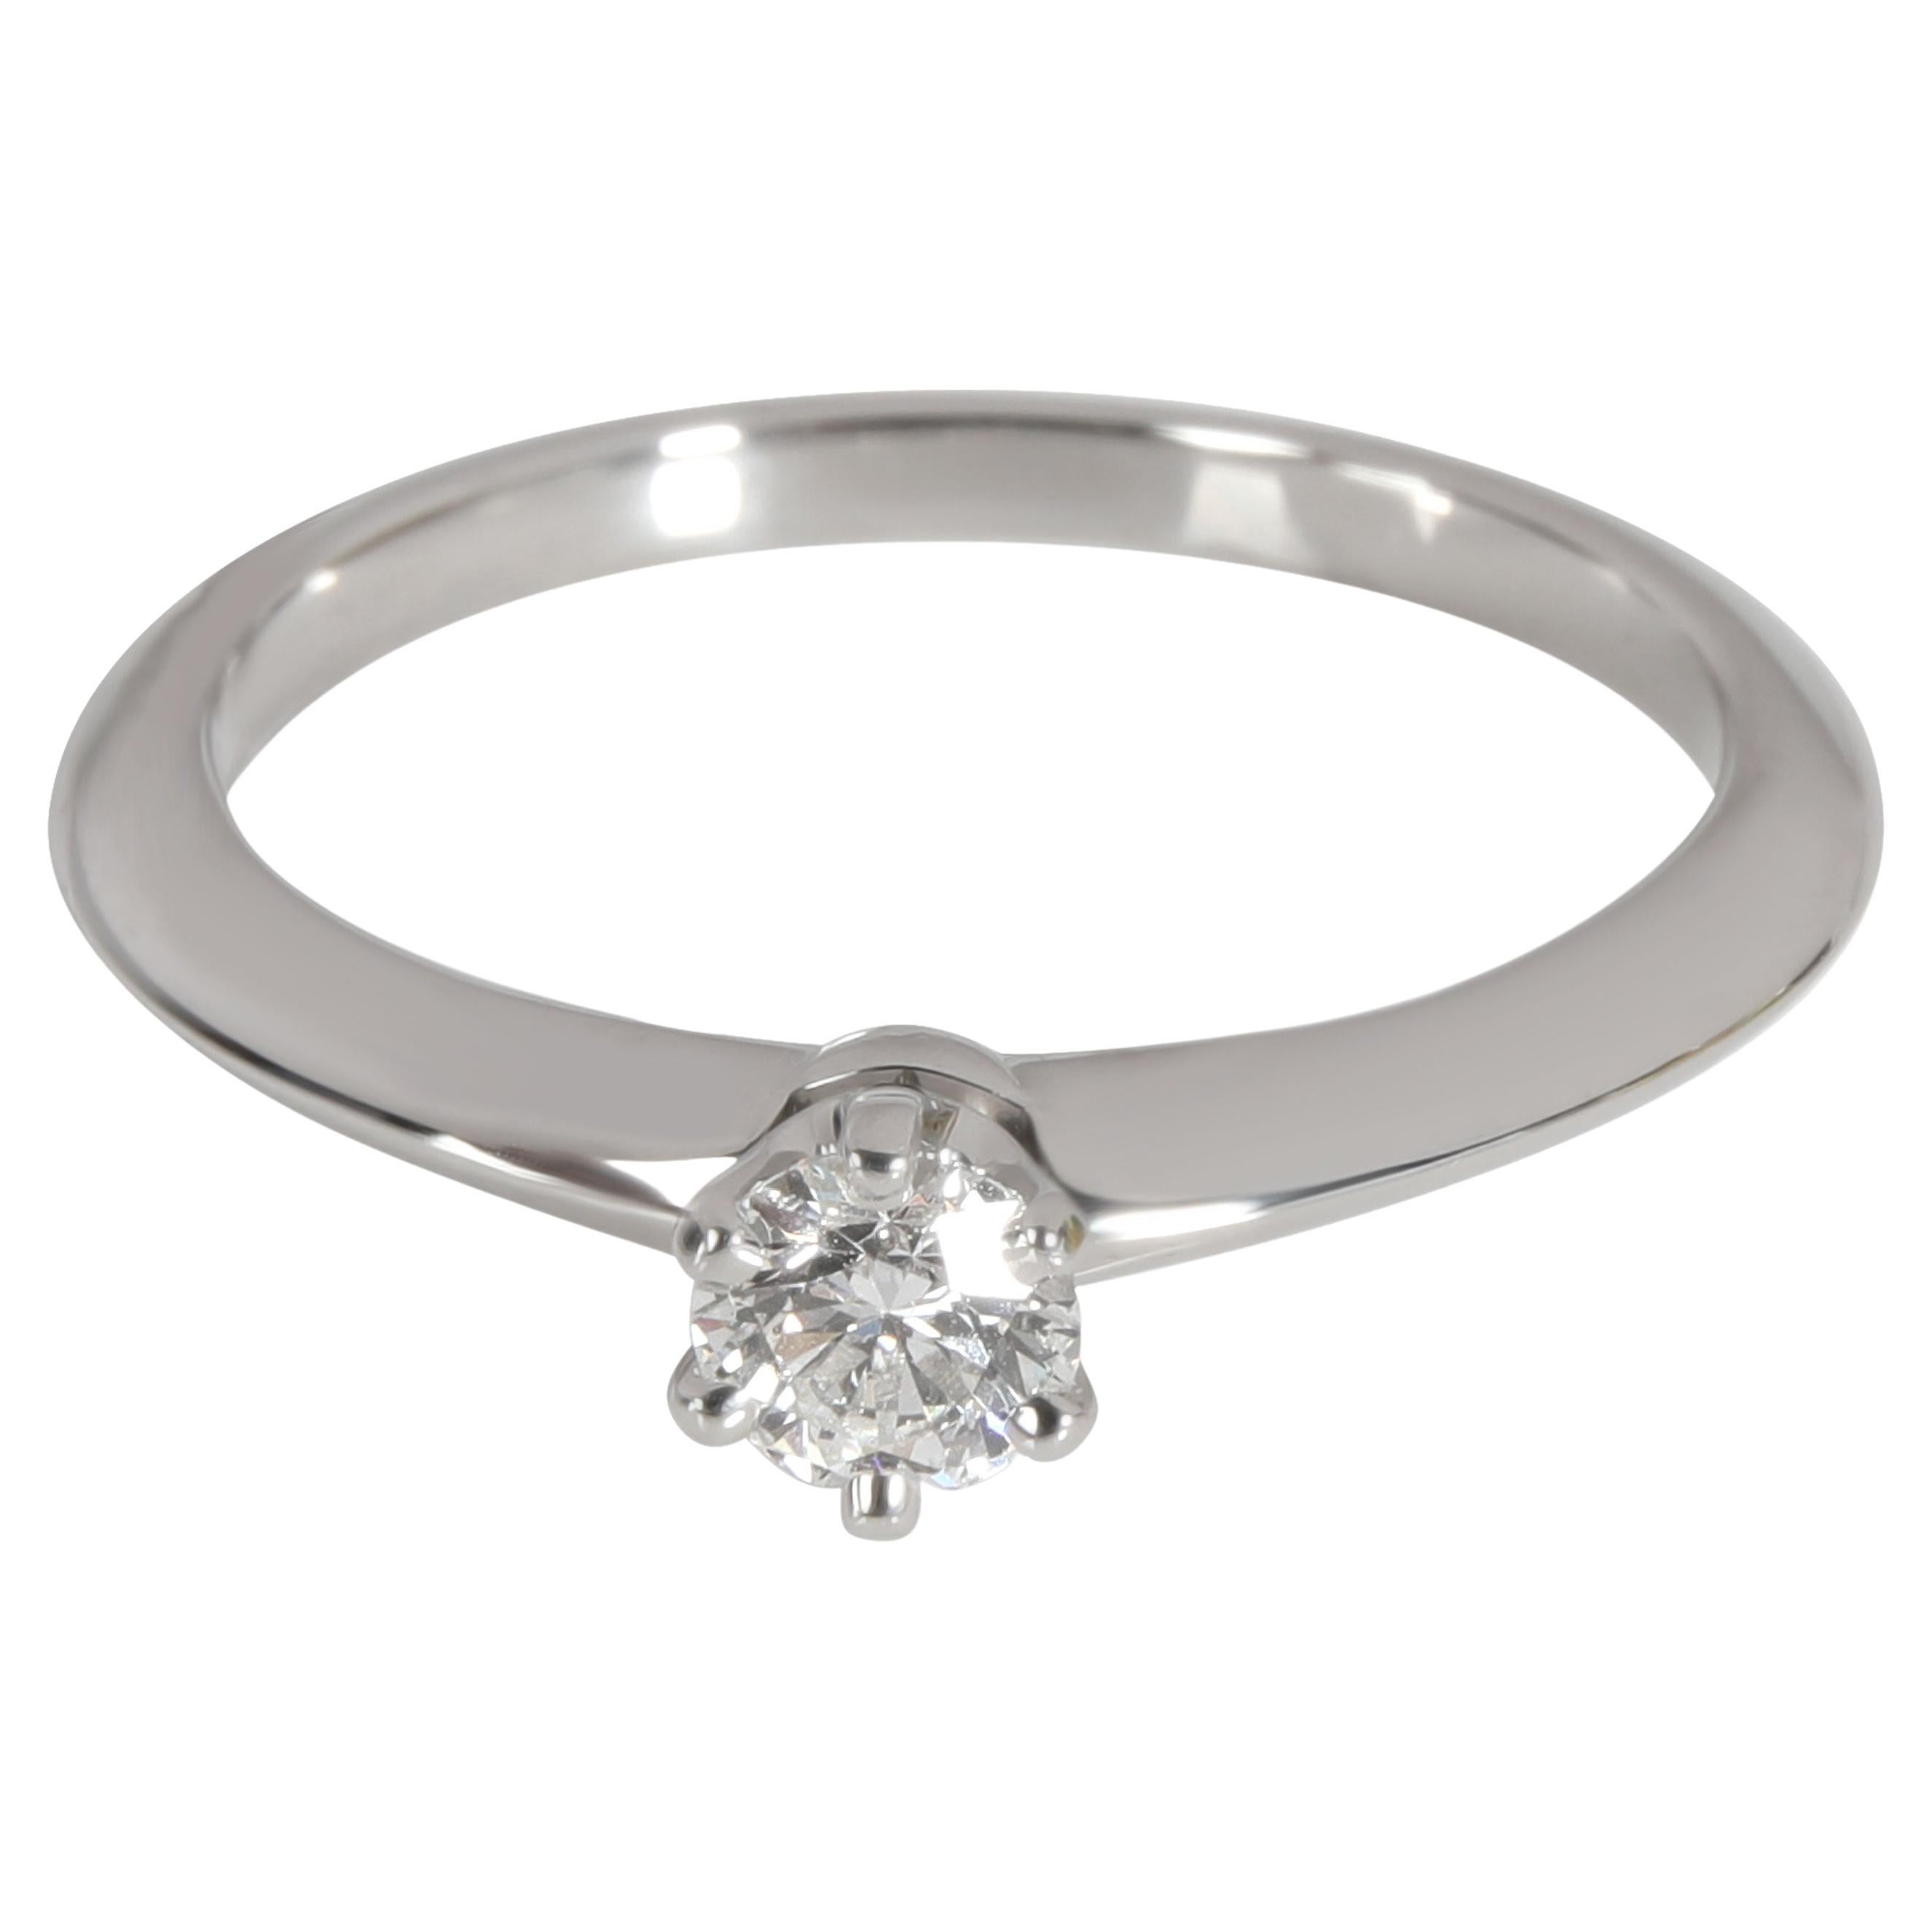 Tiffany & Co. Diamond Solitaire Engagement Ring in Platinum G VS1 0.21 CTW